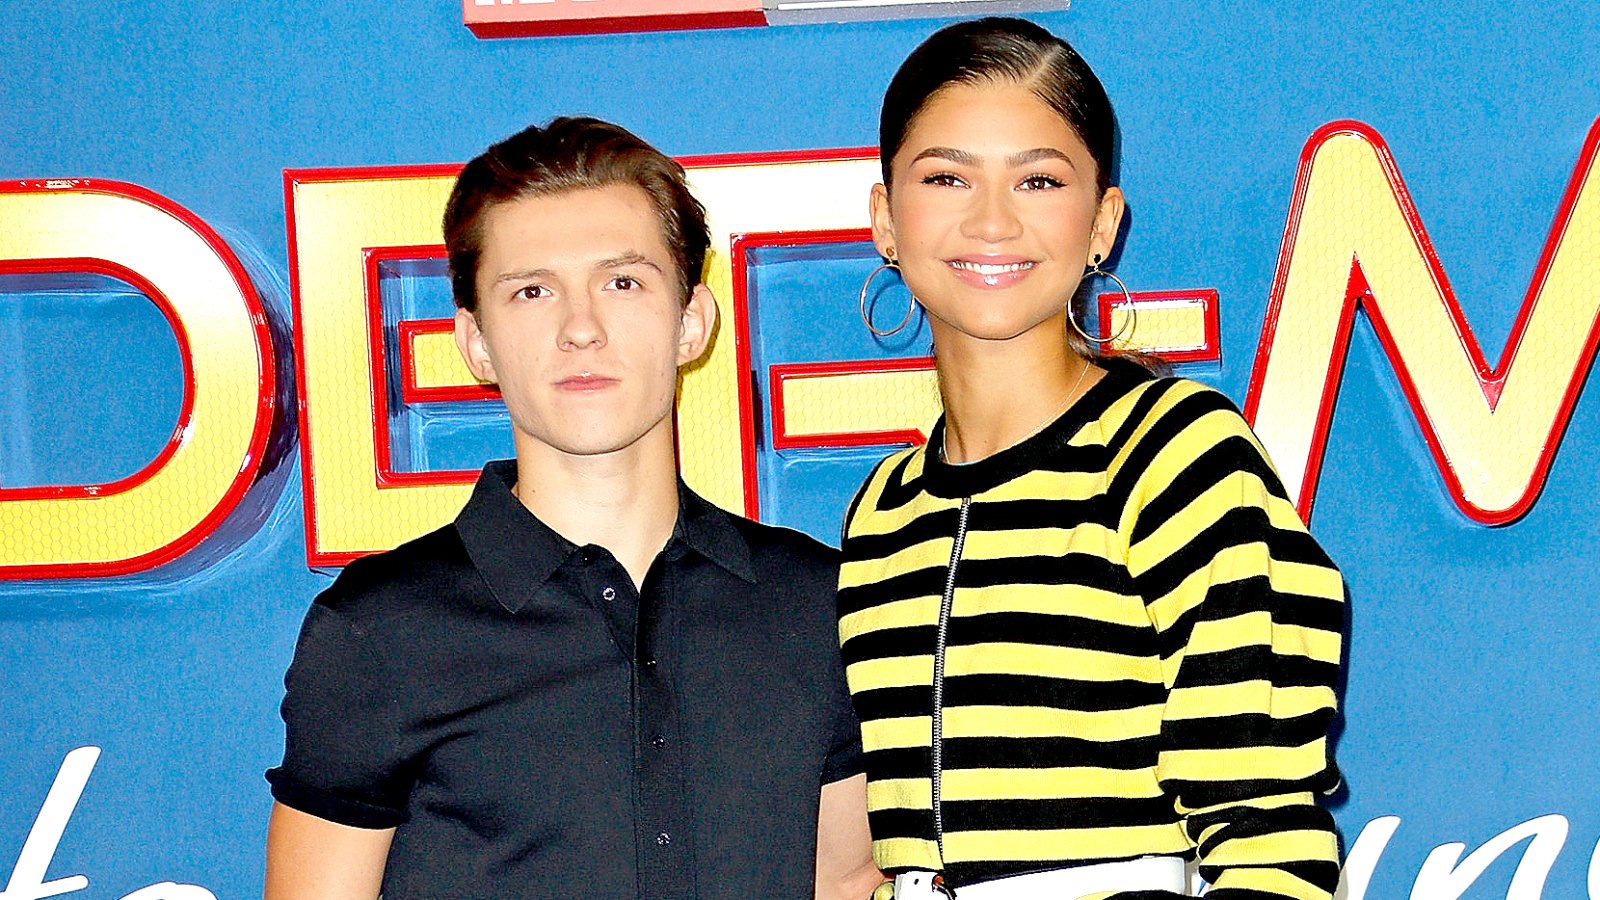 Tom Holland and Zendaya attend the "Spider-Man : Homecoming" photocall at The Ham Yard Hotel on June 15, 2017 in London, England.